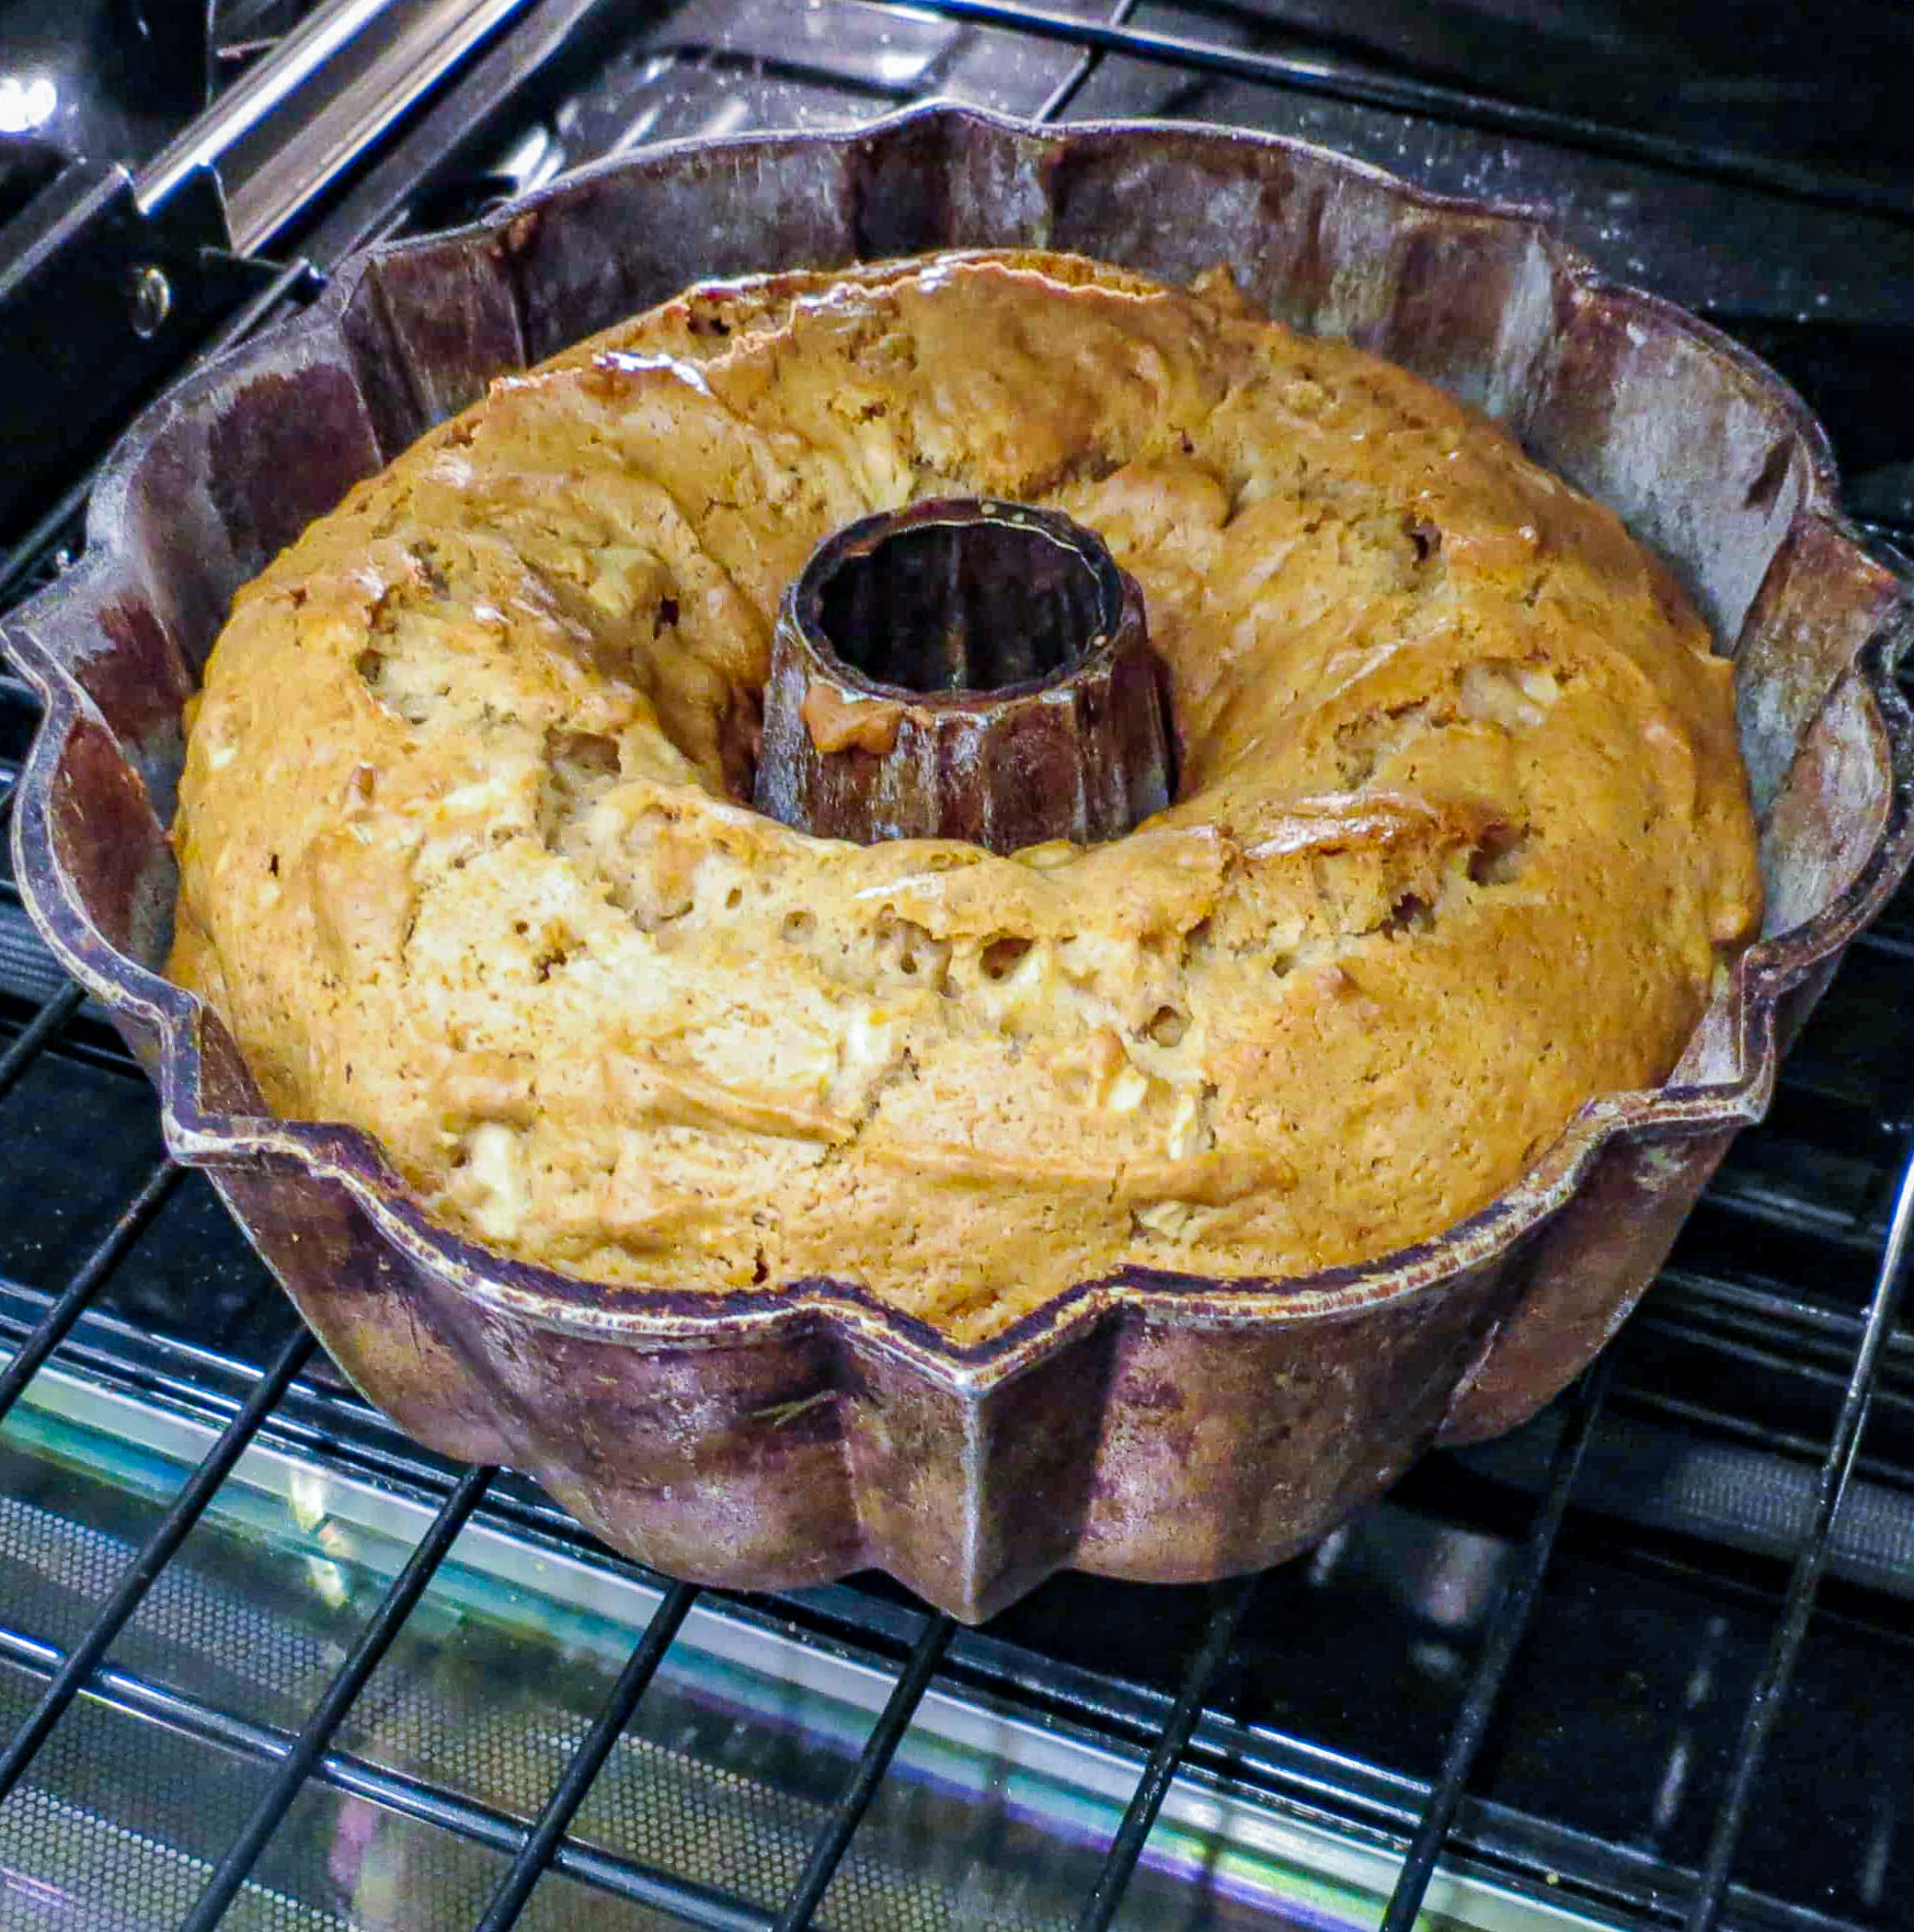 A bundt pan with a fresh apple cake in the oven.